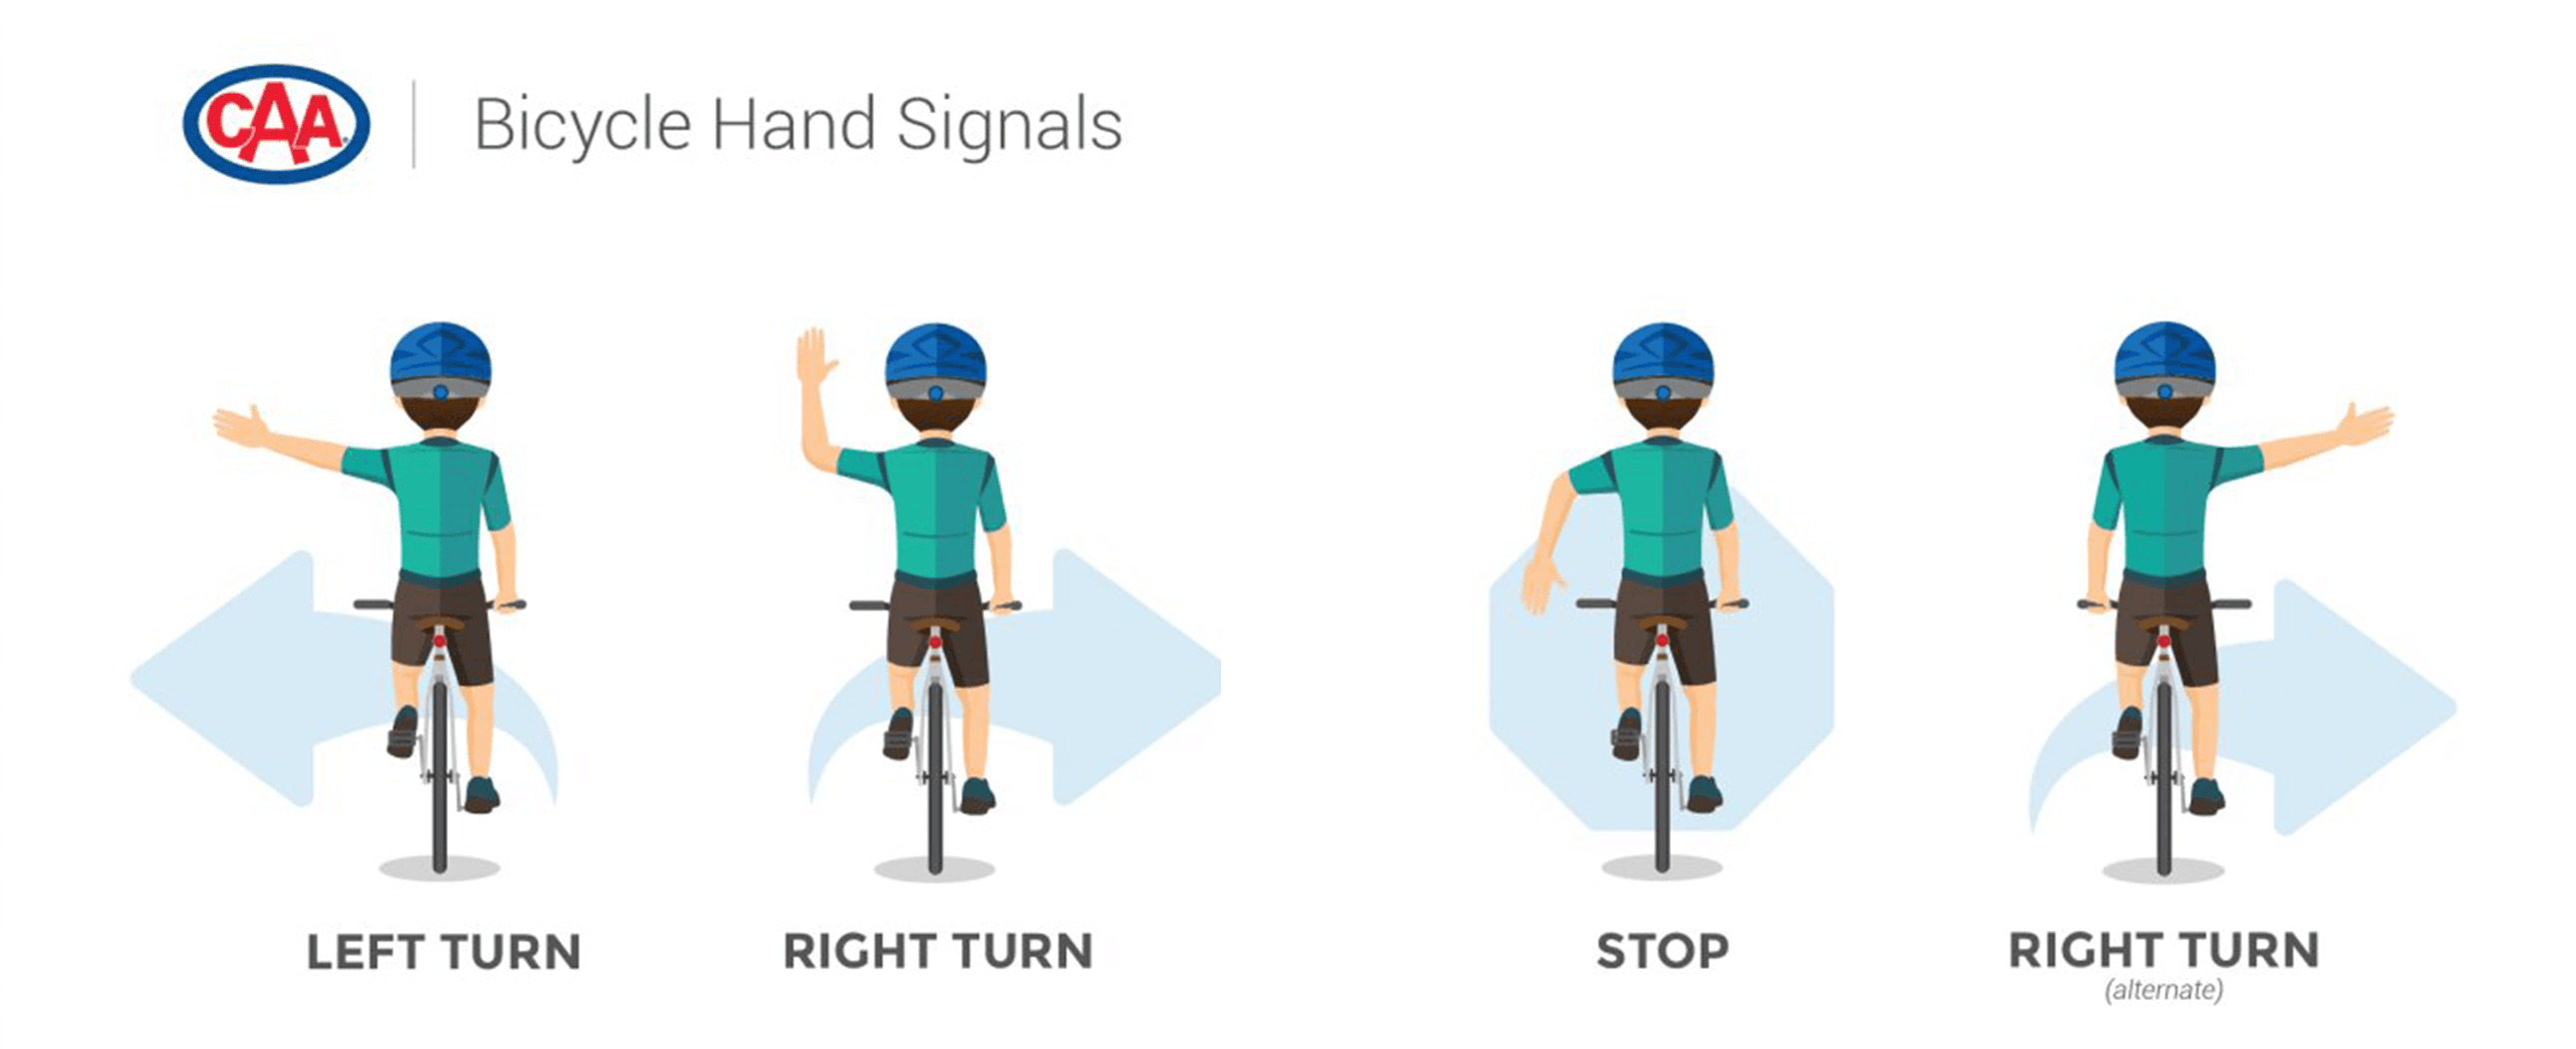 Bicycle hand signals: left turn, right turn, stop and right turn alternative